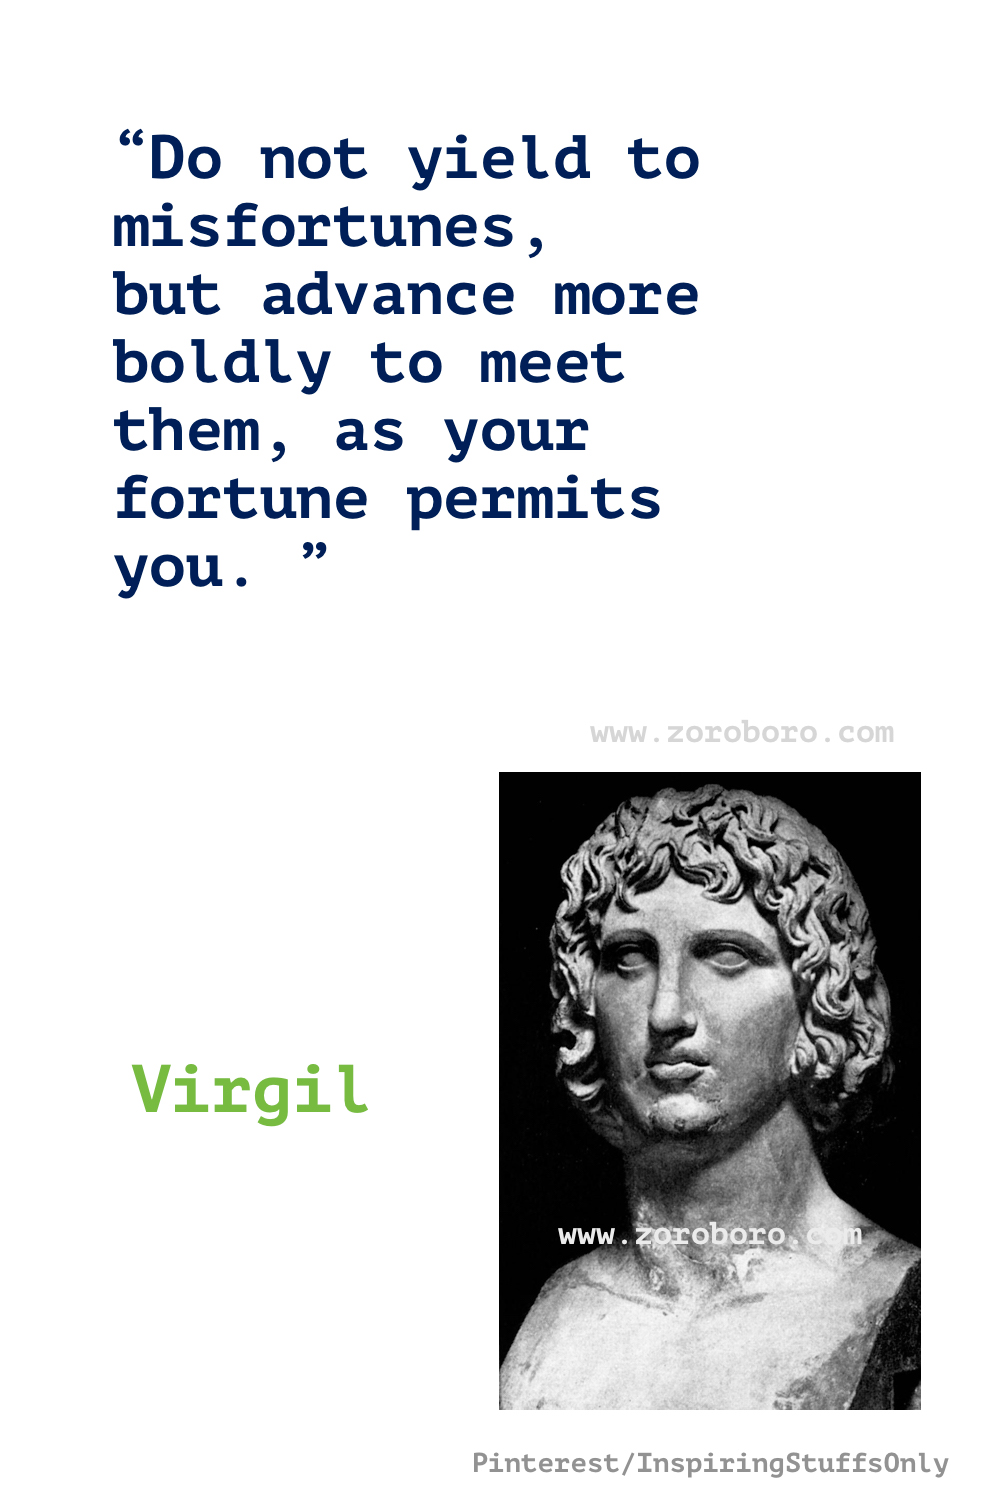 Virgil Quotes, Virgil Poems, Virgil Poetry, The Aeneid Quotes, Virgil Books Quotes, Virgil Poet, Virgil Eclogues Quotes.